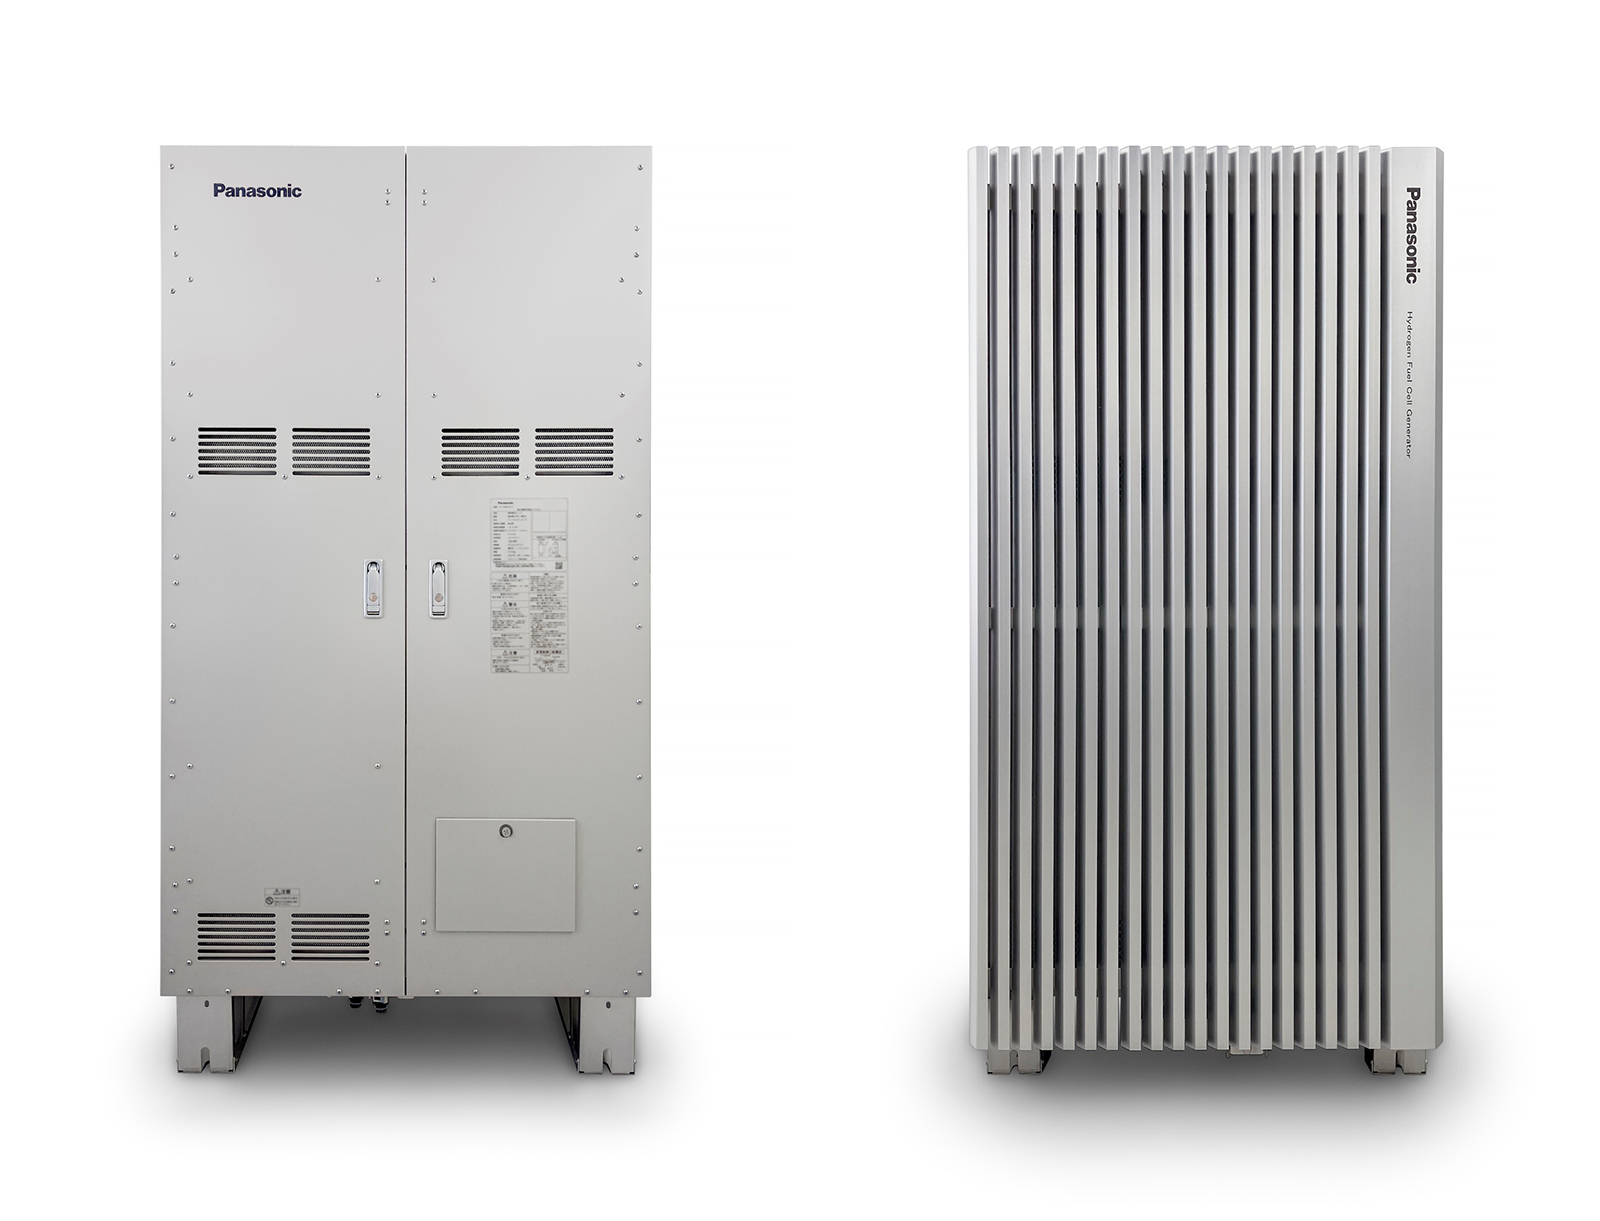 Panasonic Delivers Taiwan's First CO2 Refrigerant CFC-free Freezer 